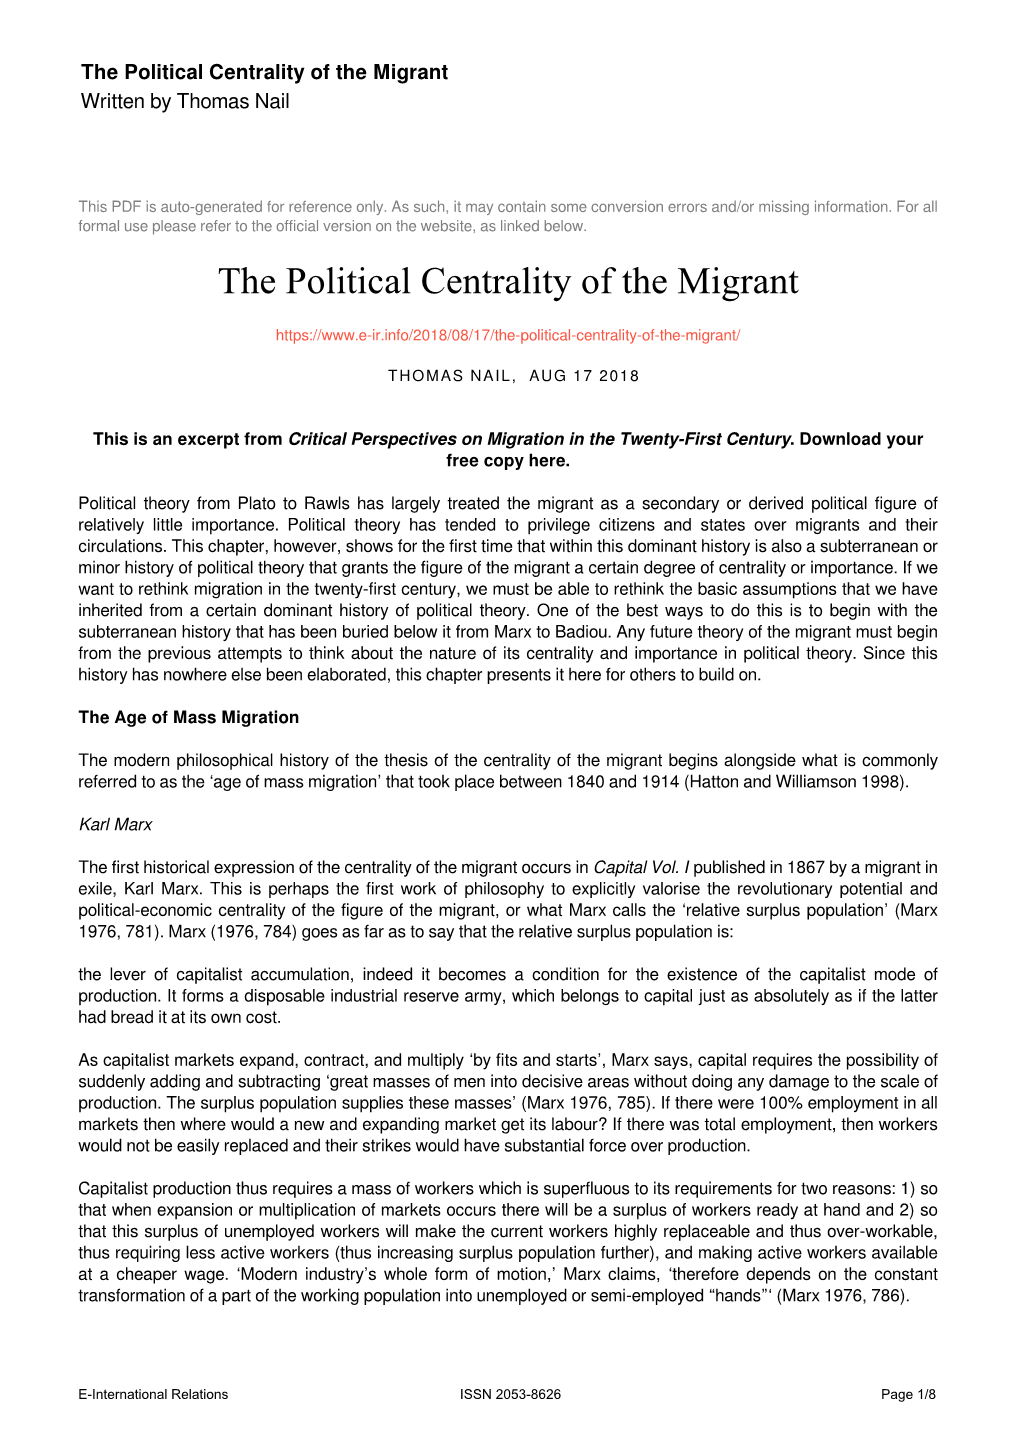 The Political Centrality of the Migrant Written by Thomas Nail